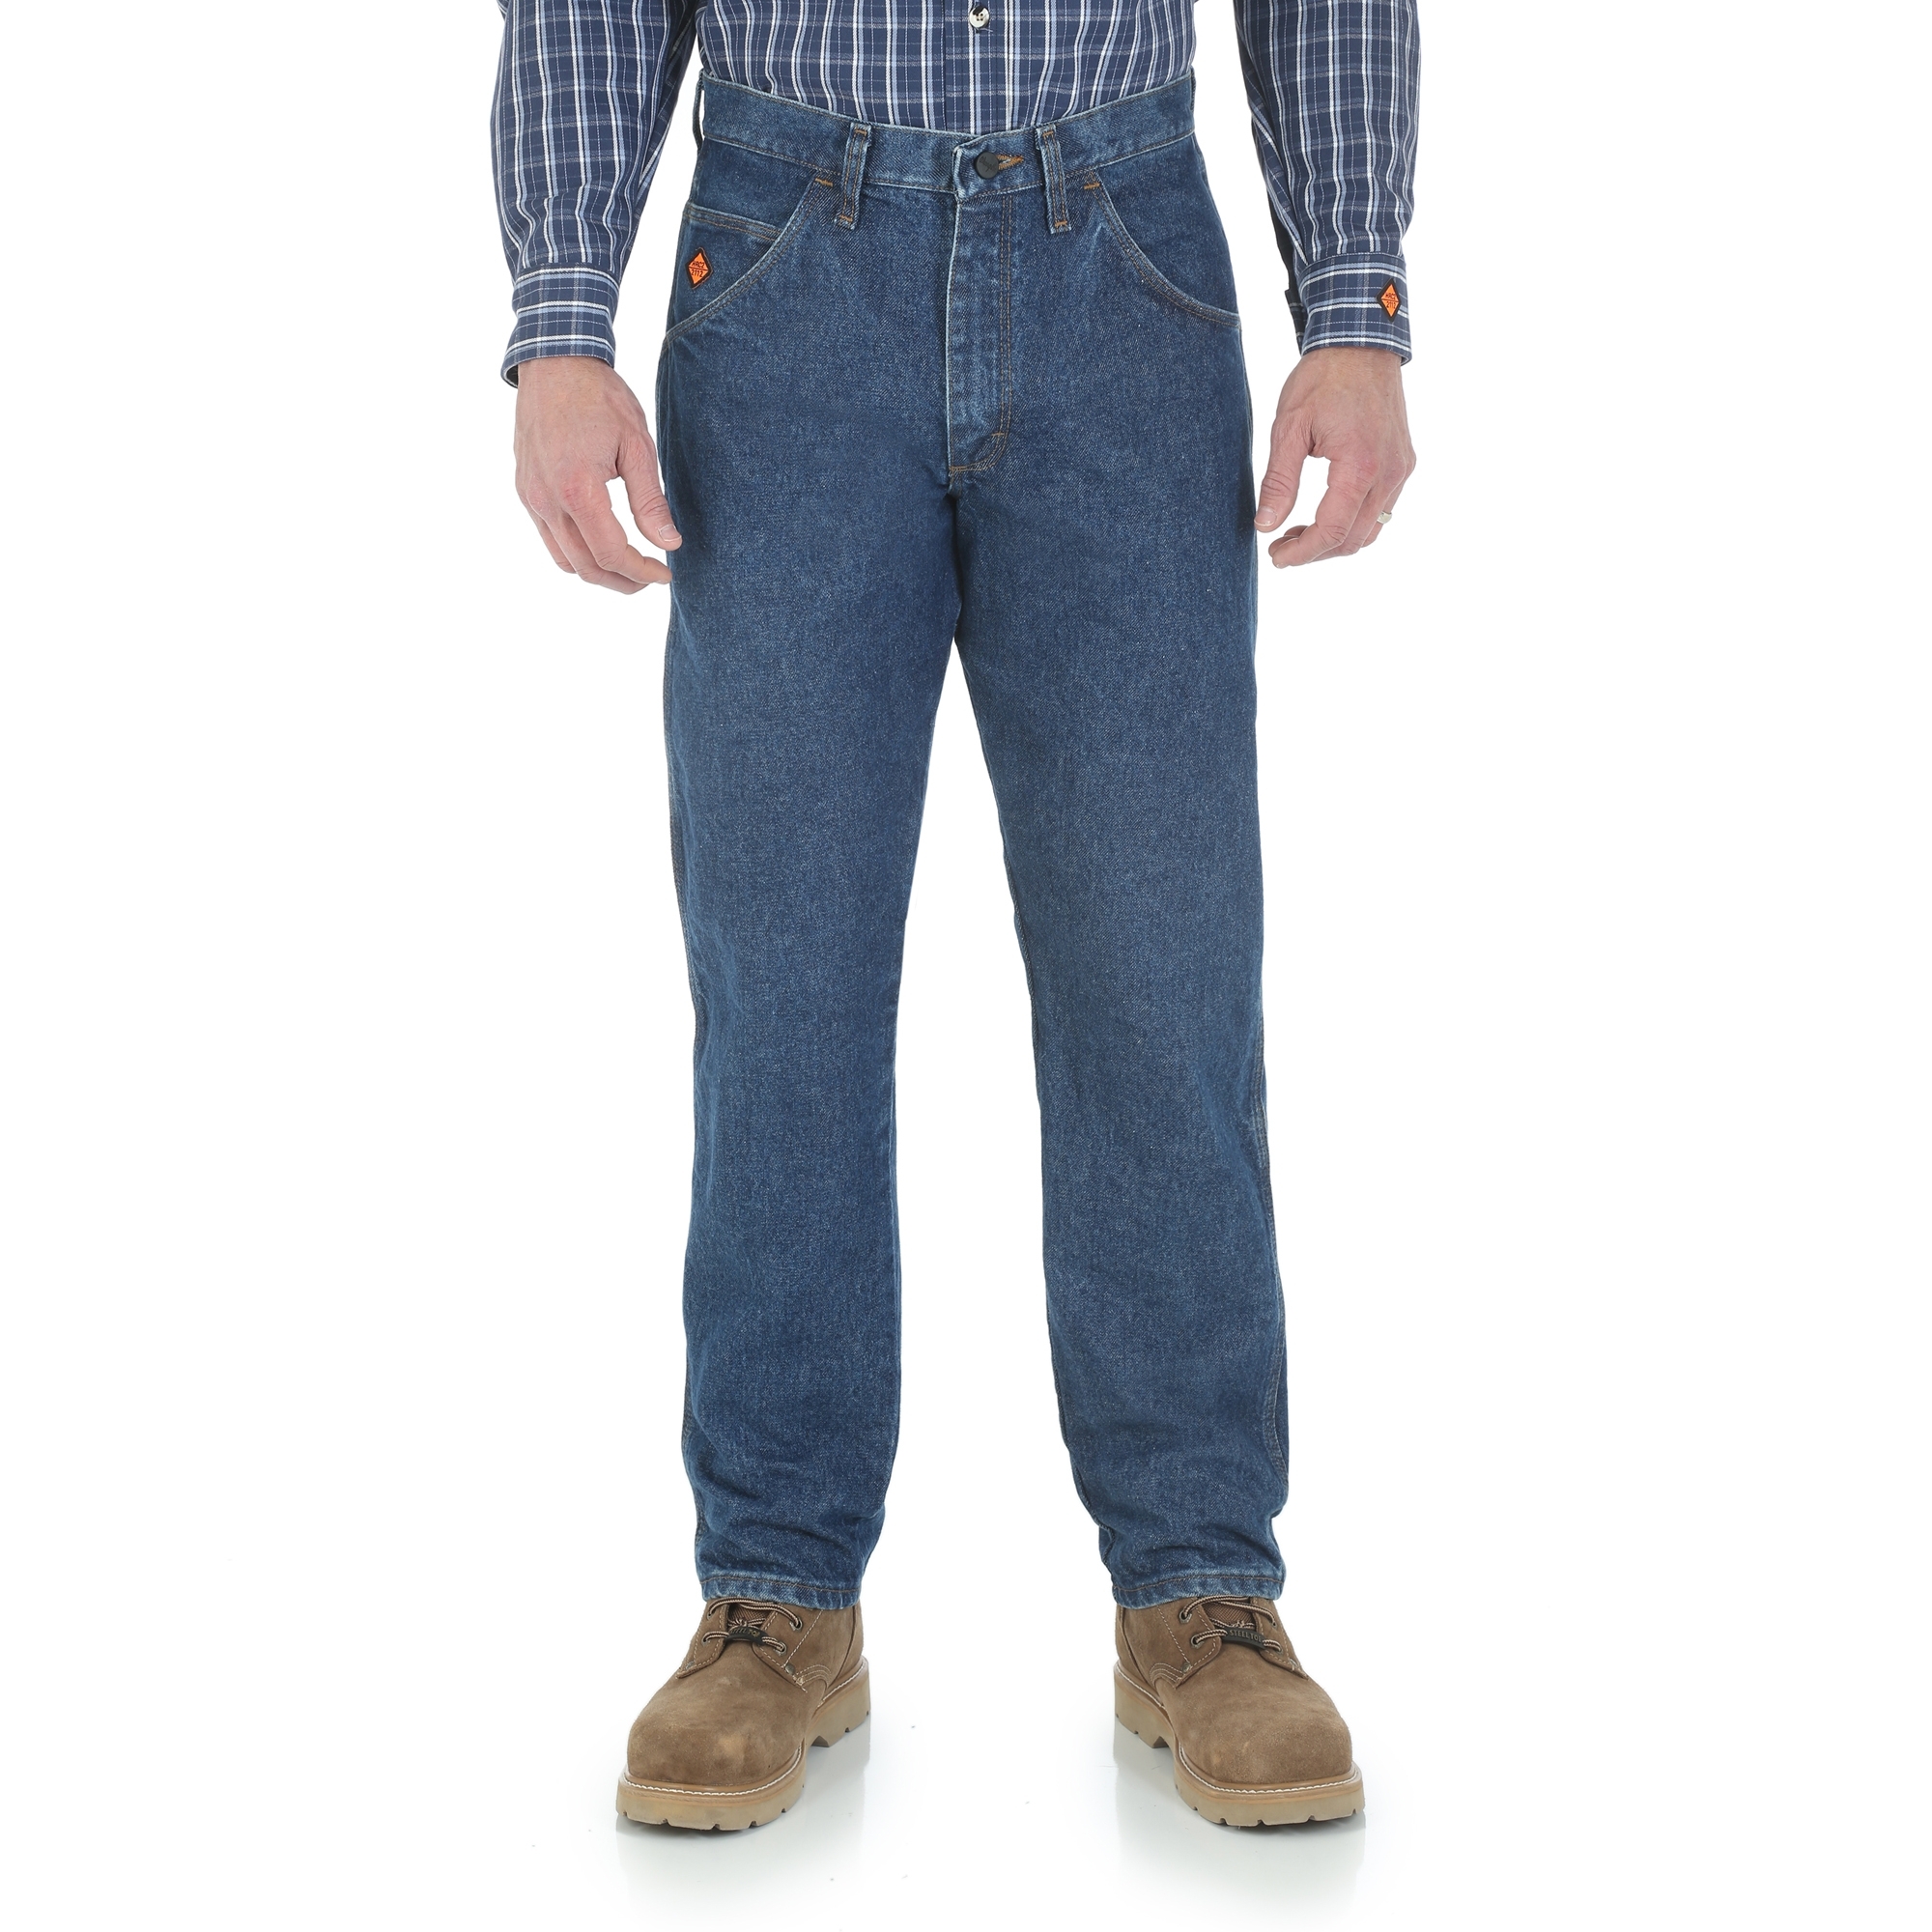 Wrangler Riggs Workwear FR Relaxed Fit Jeans